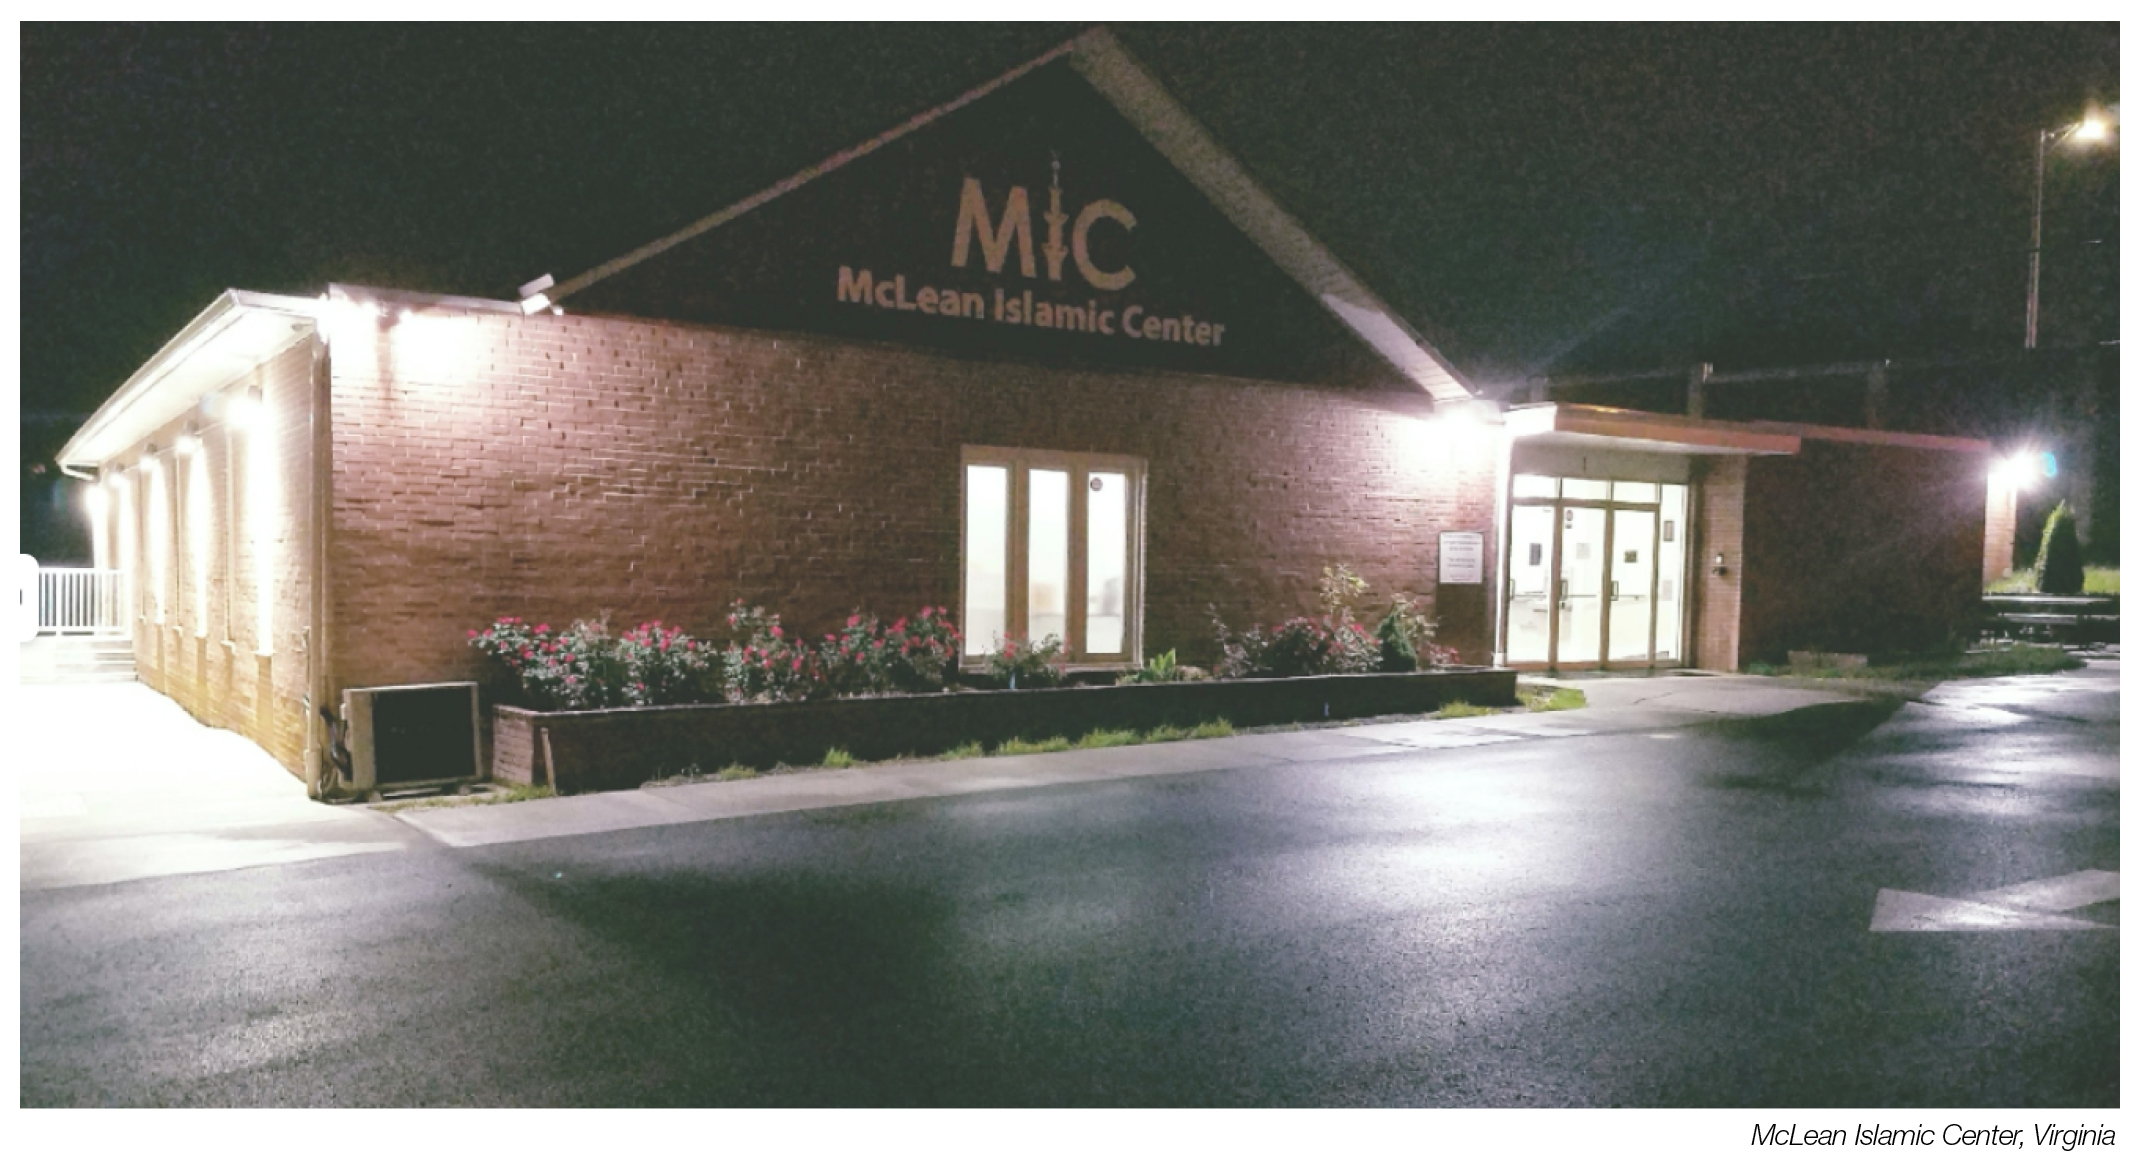 The exterior of McLean Islamic Center in McLean, Virginia at night.